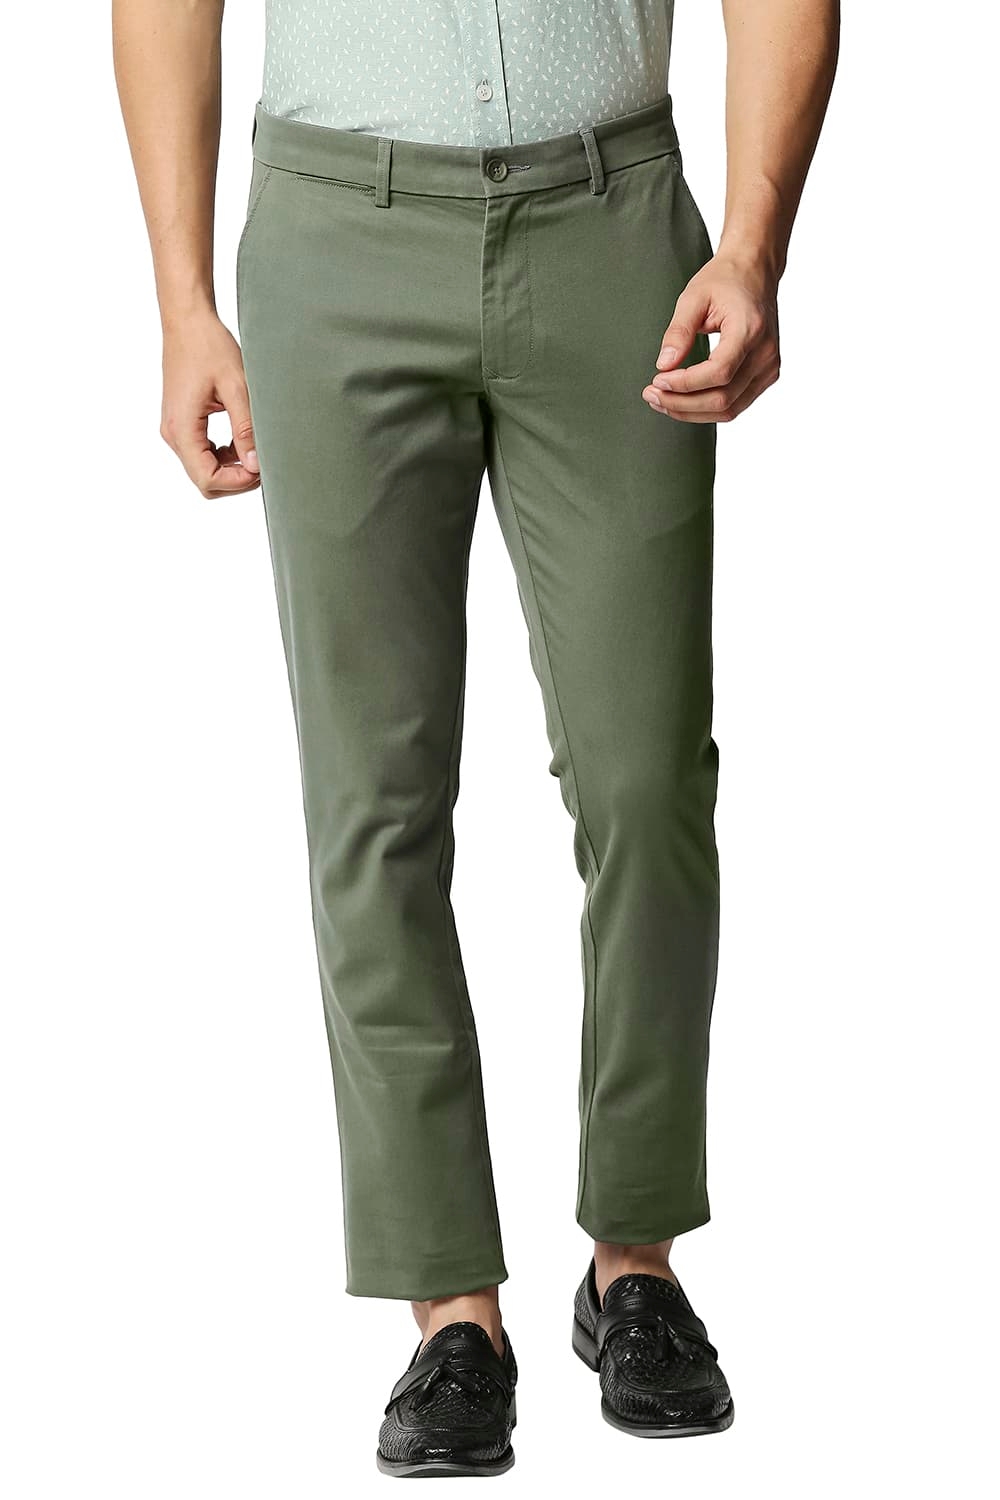 Basics | BASICS CASUAL PLAIN GREEN COTTON STRETCH TAPERED TROUSERS 